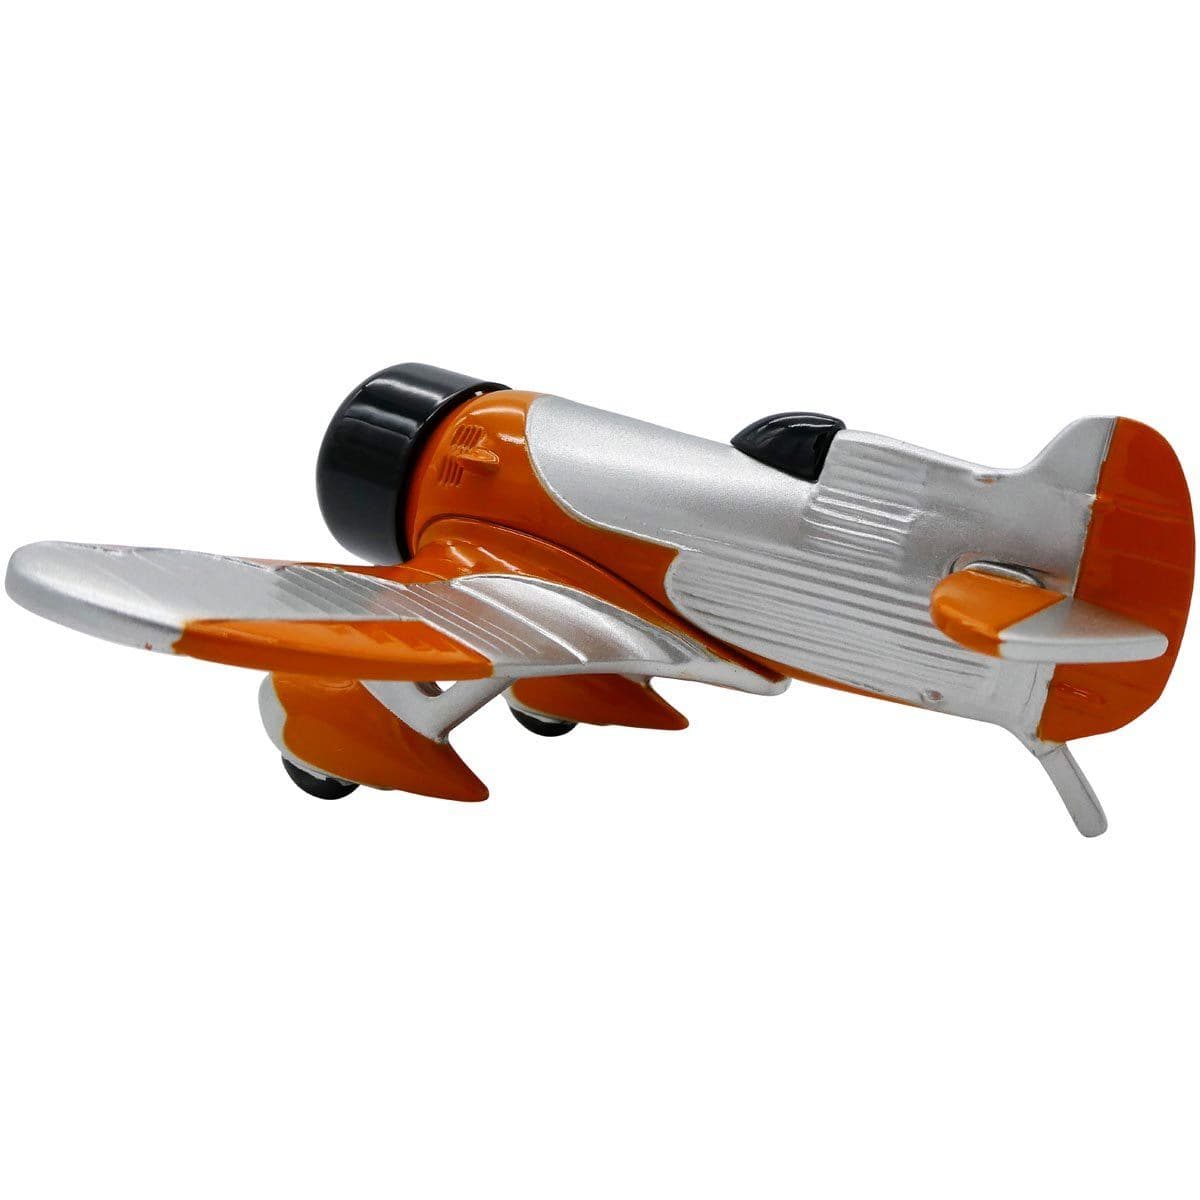 Pilot Toys Orange and Silver Gee Bee Desk Clock